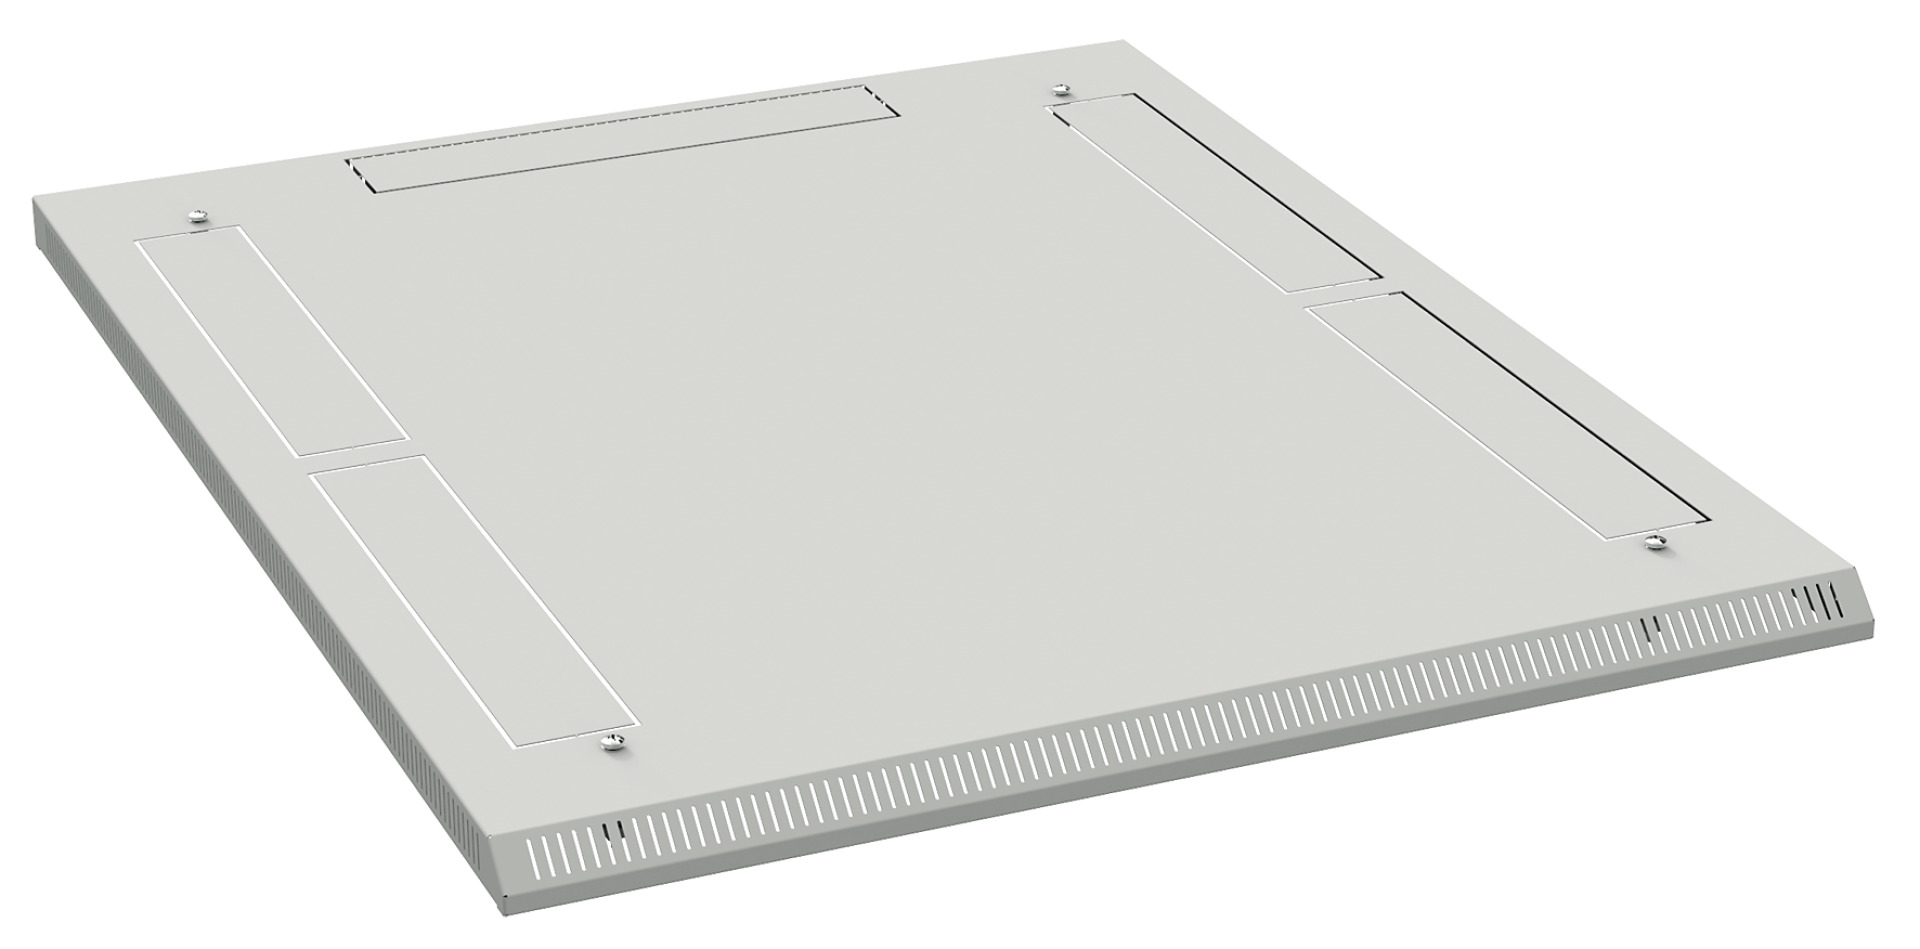 Additional Roof H=40 mm, 600x800 mm, RAL7035, for Cabinet Series PRO